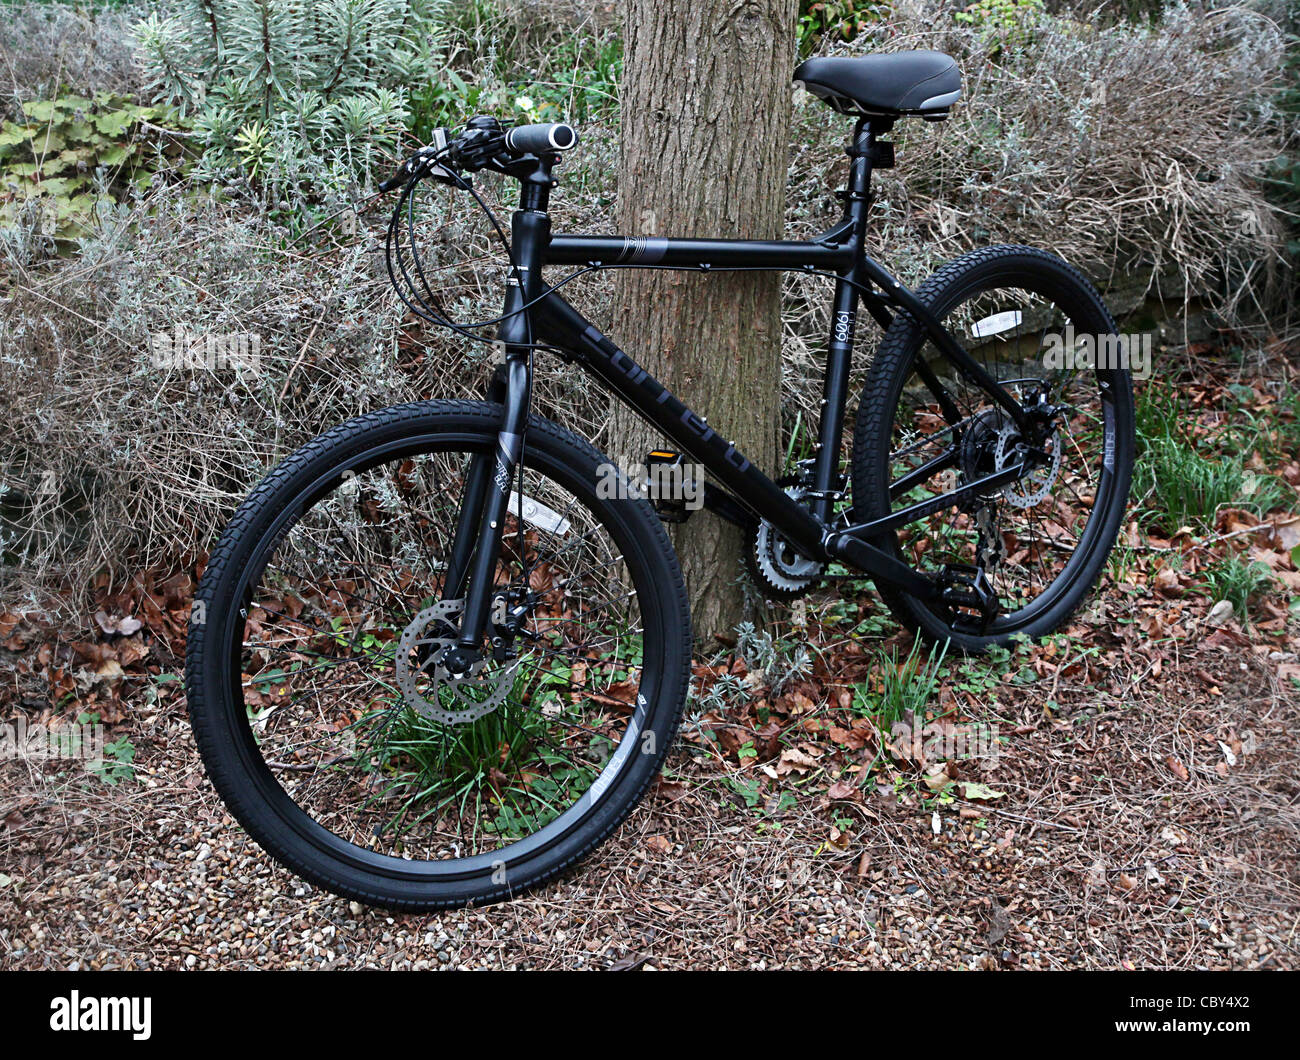 A Hybrid mountain bike leaning against a tree, Stock Photo